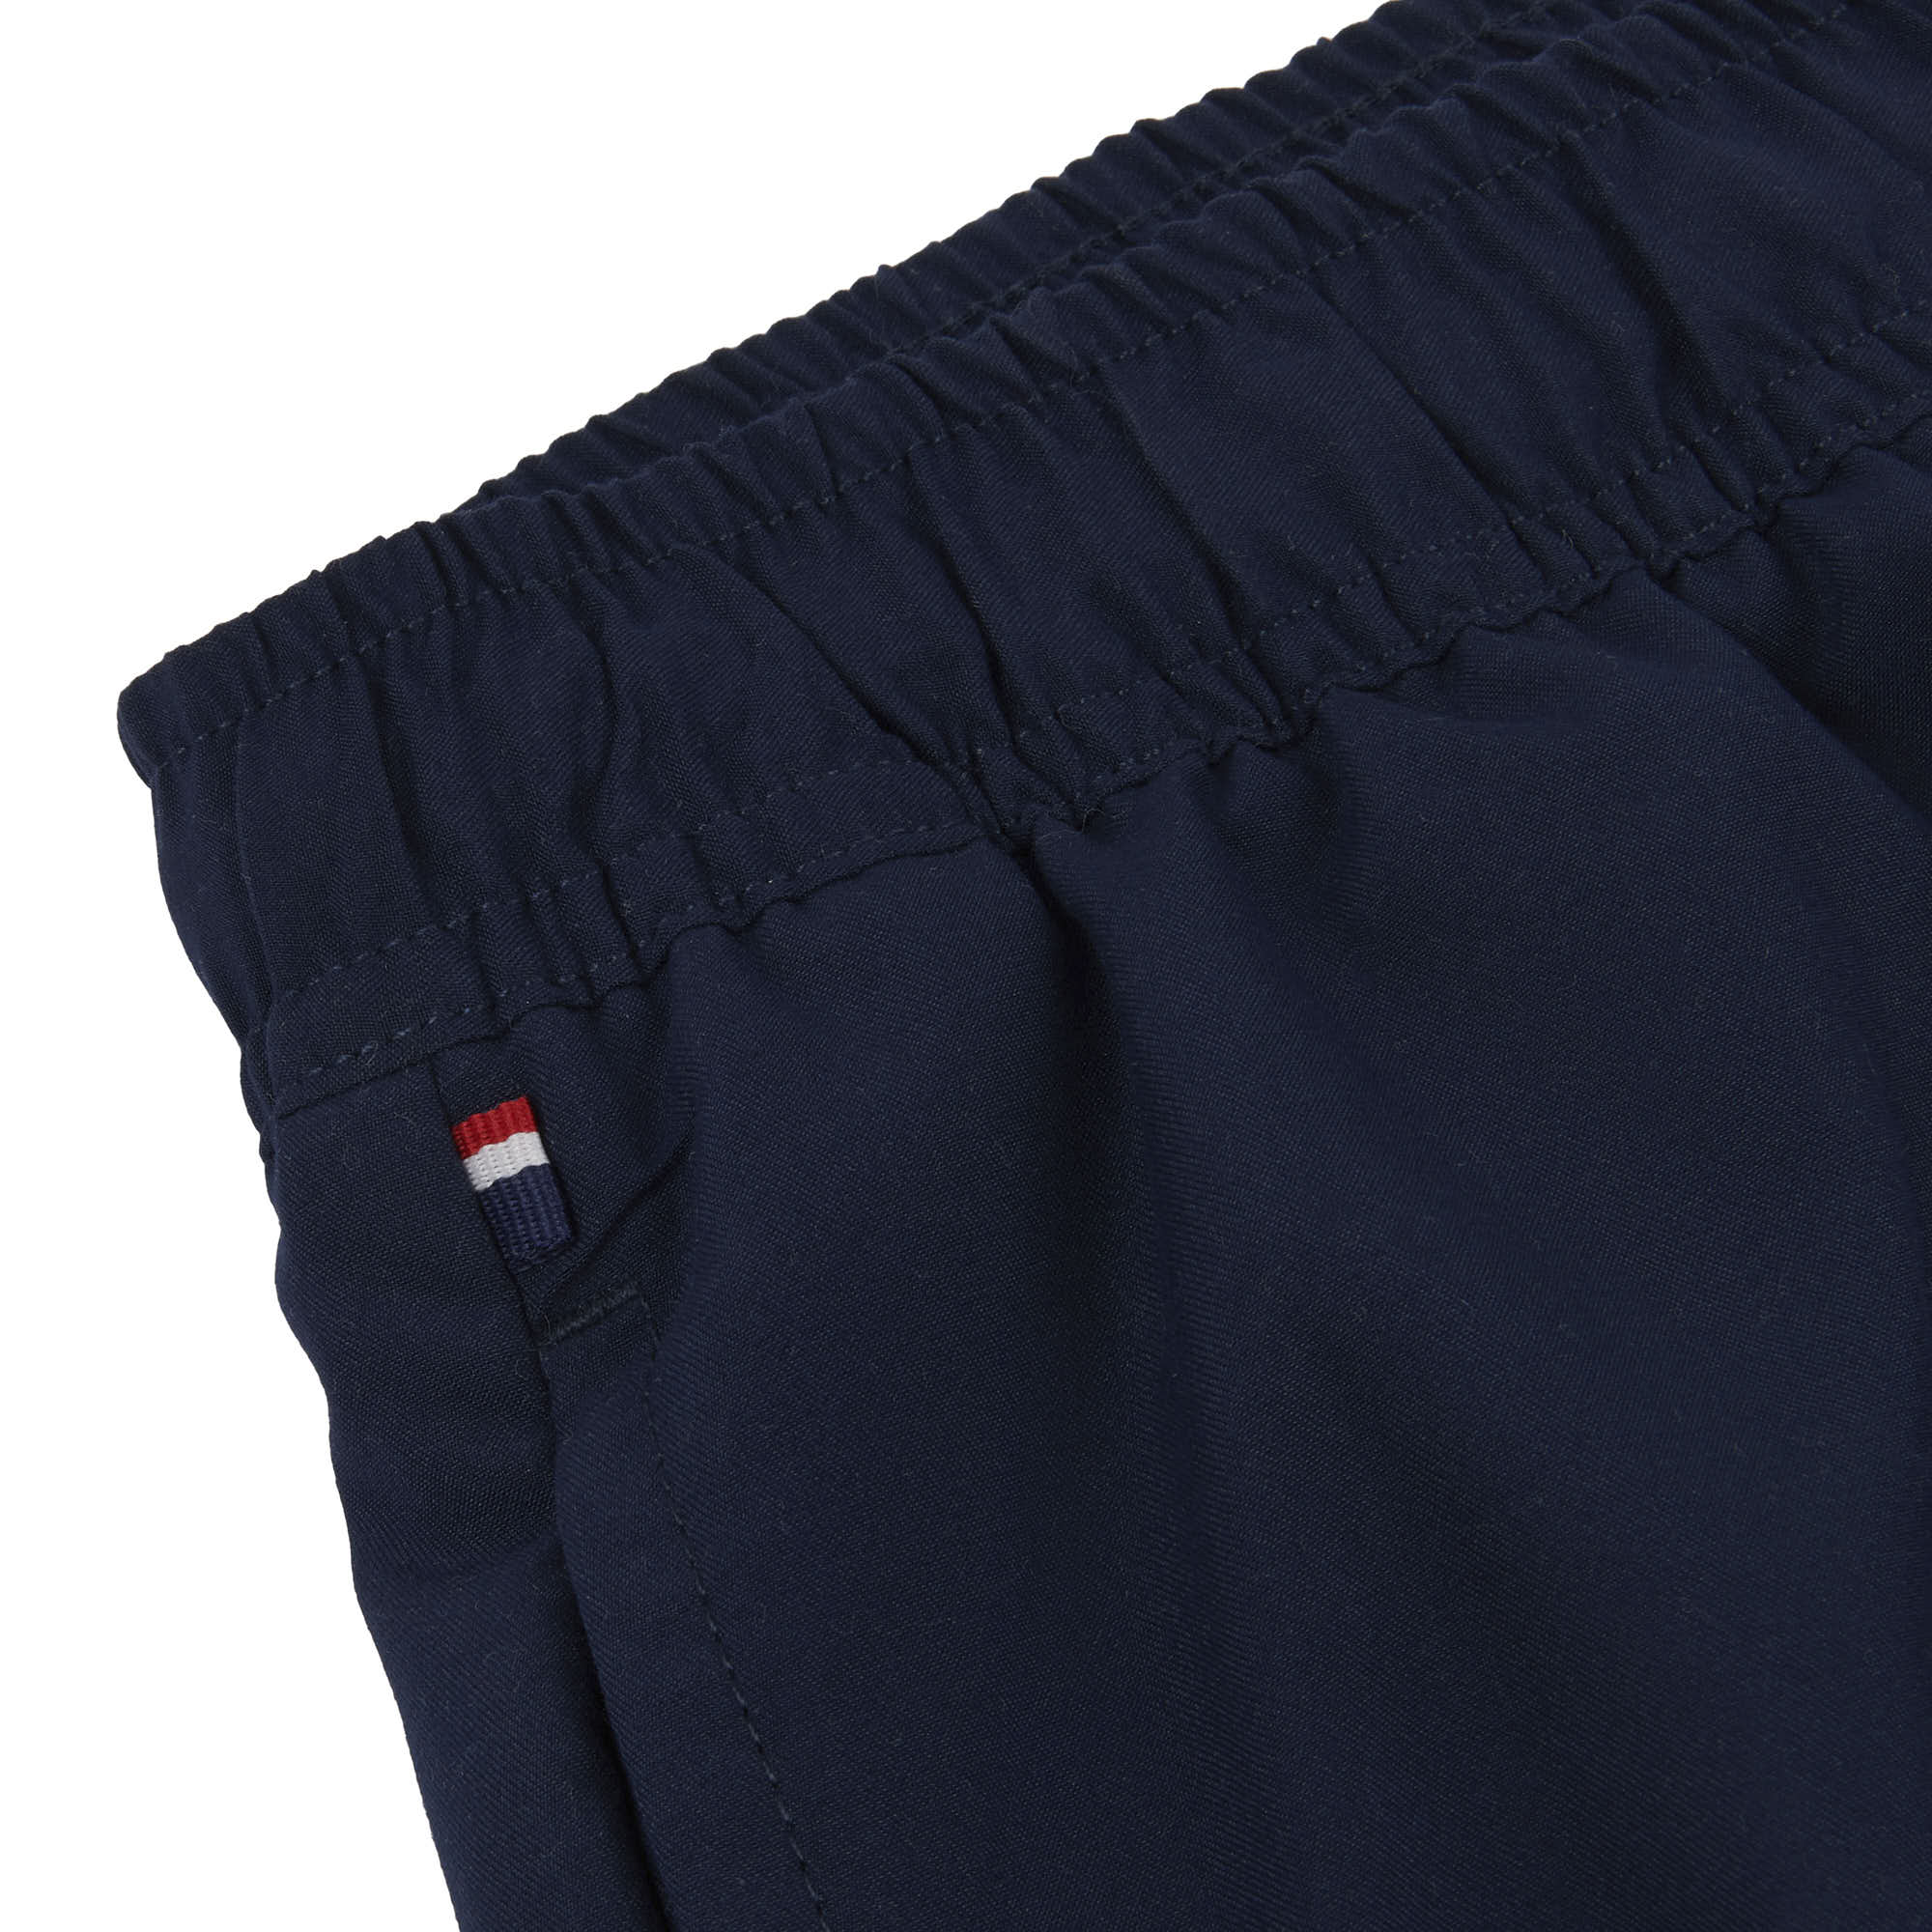 Mens Solid Swim Shorts in Navy Blue